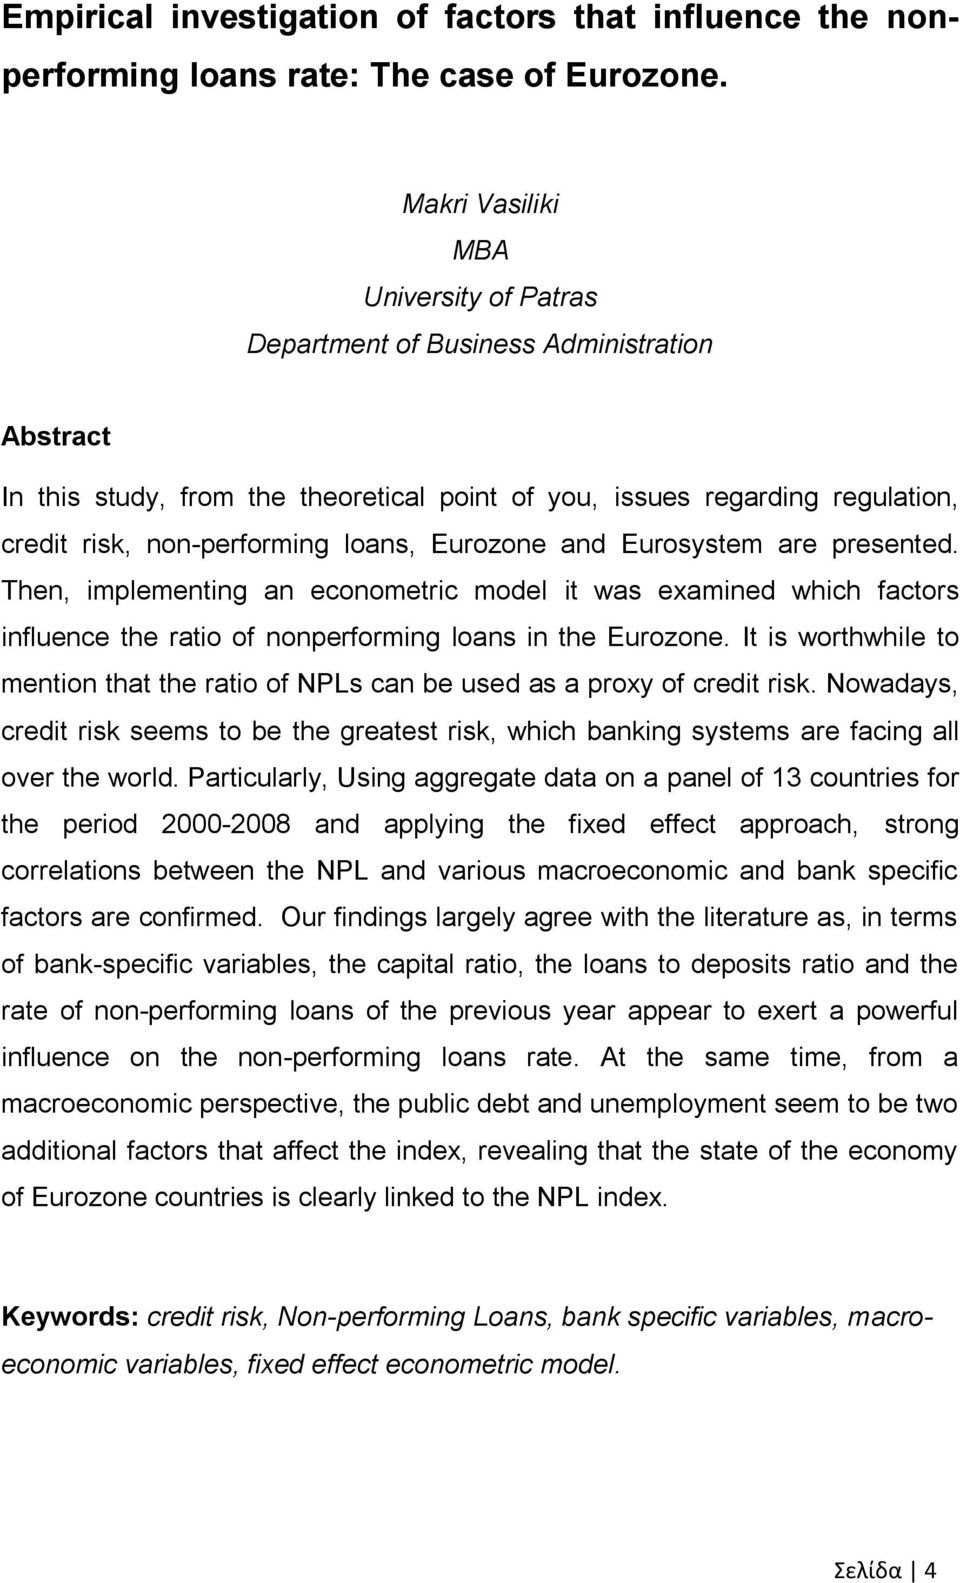 loans, Eurozone and Eurosystem are presented. Then, implementing an econometric model it was examined which factors influence the ratio of nonperforming loans in the Eurozone.